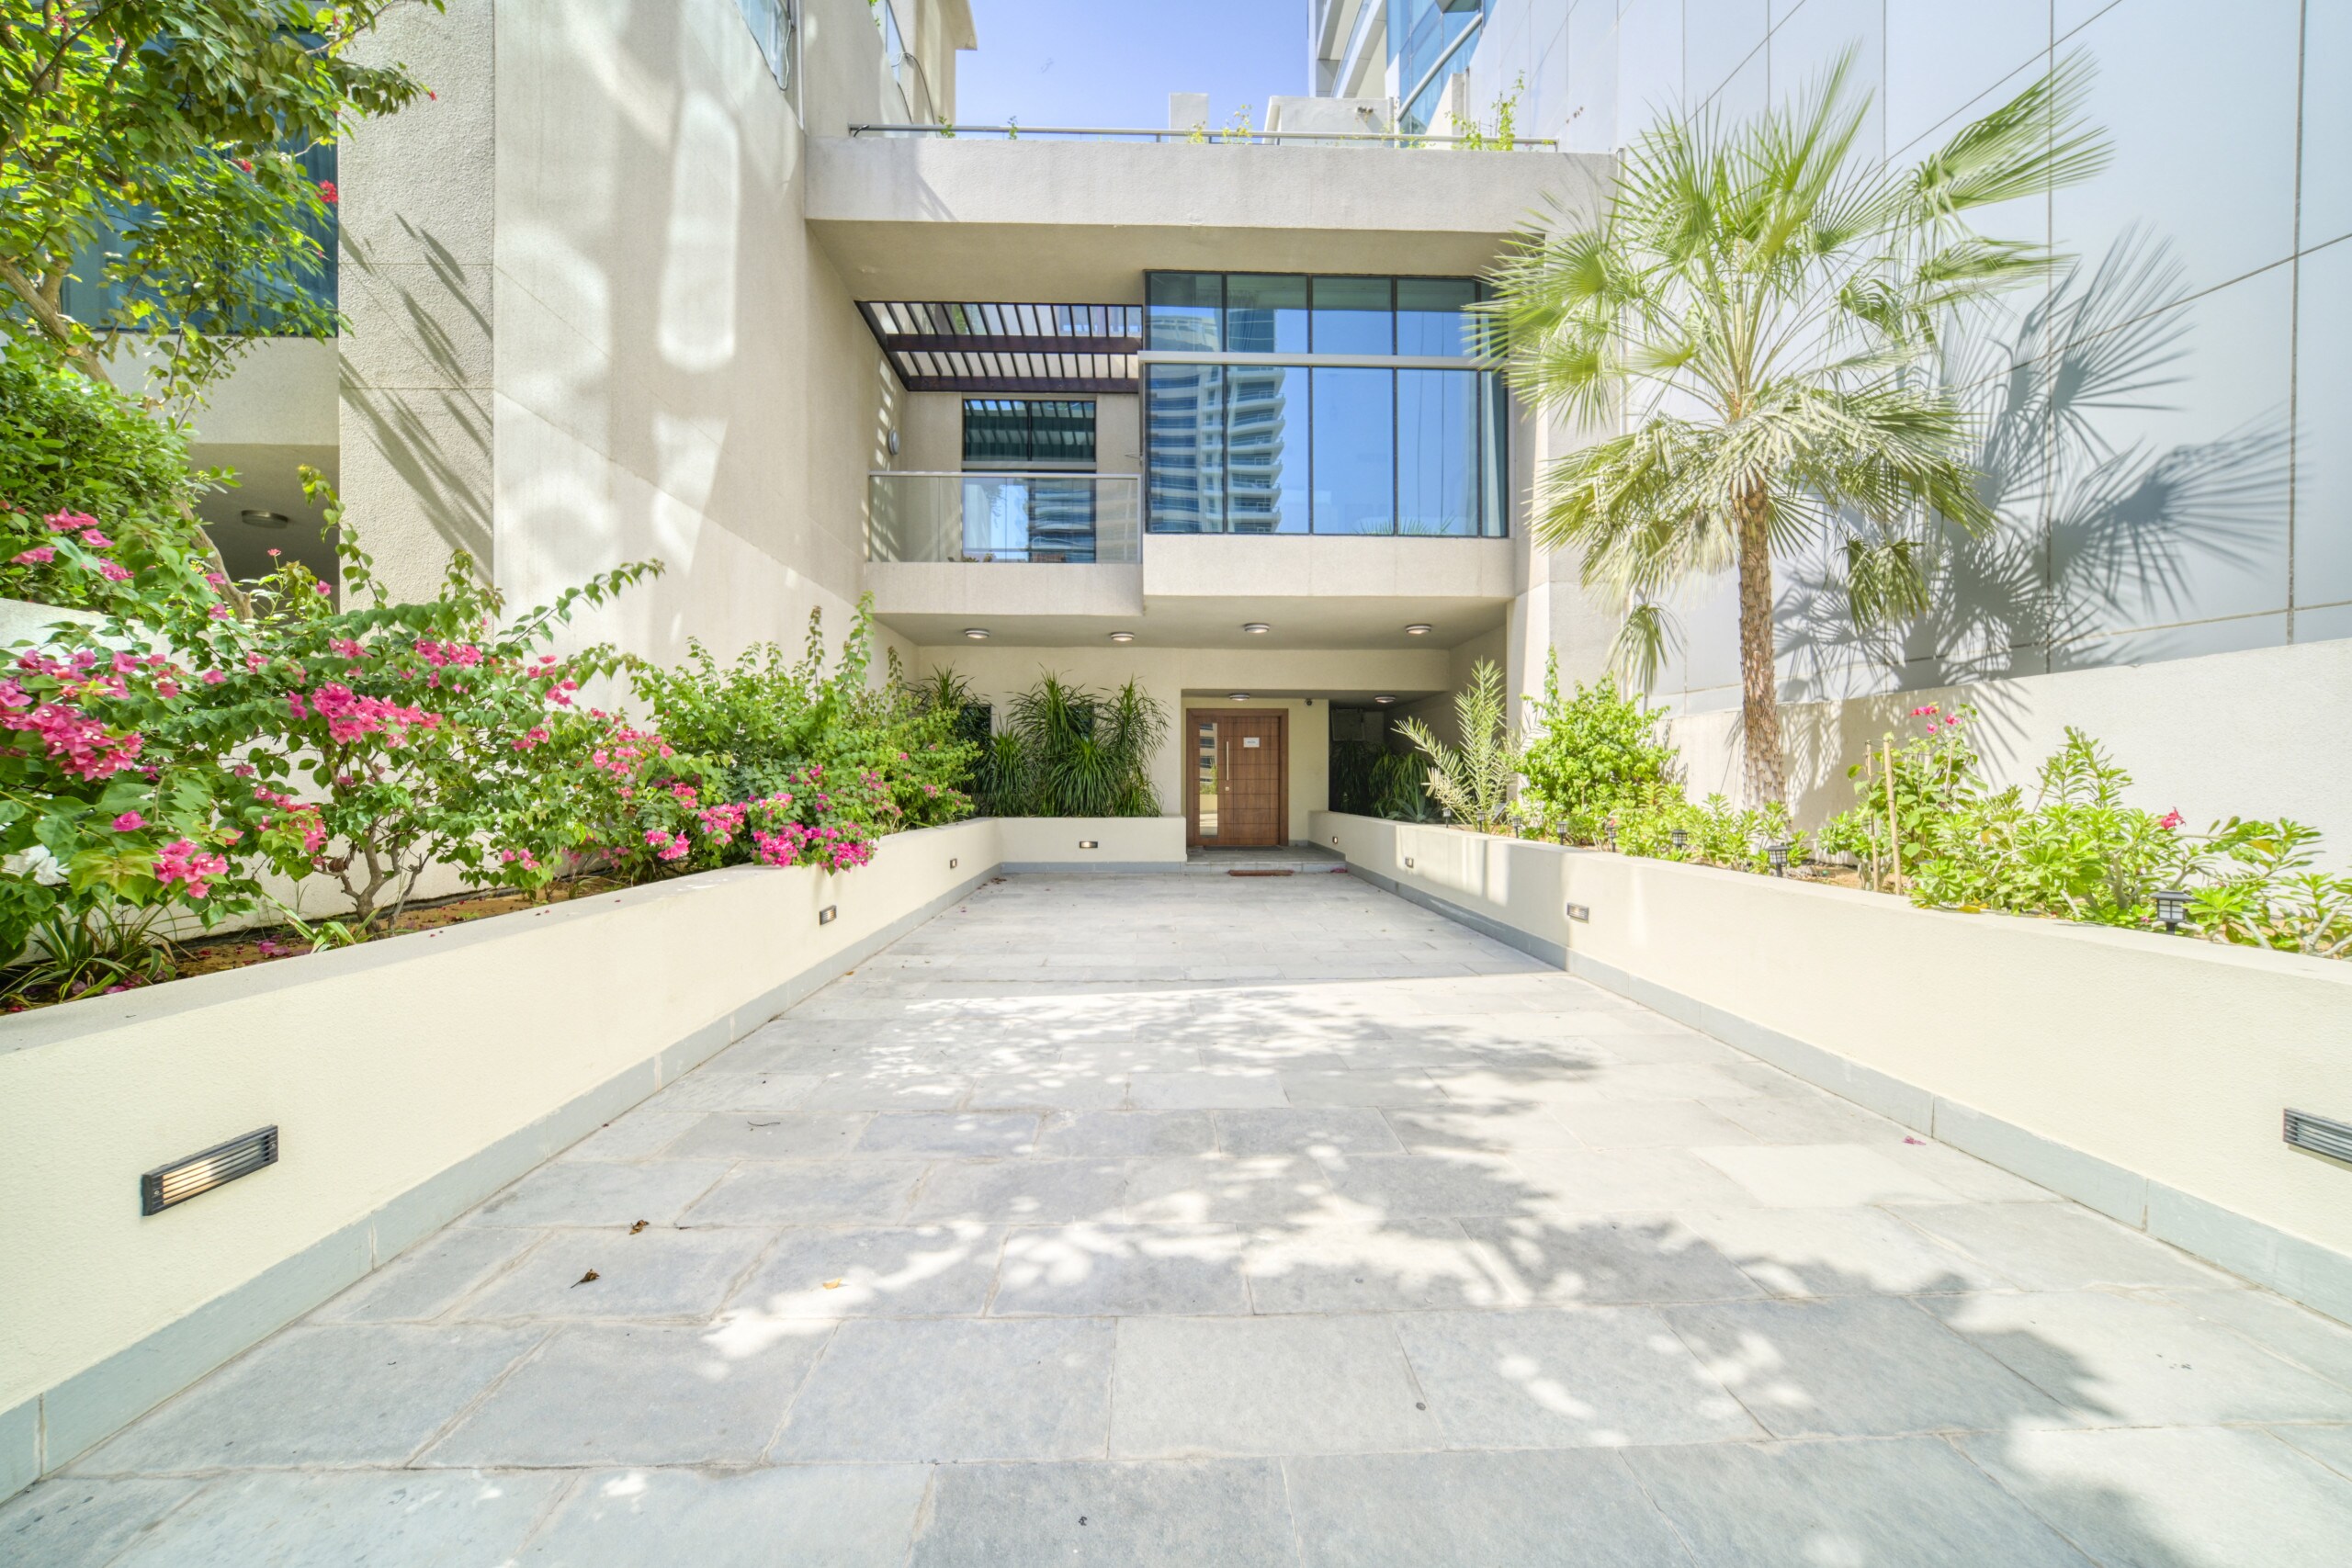 Property Image 1 - Distinguished 4BR Villa + 2 Assistant’s Room at Marinascape Dubai Marina by Property Manager